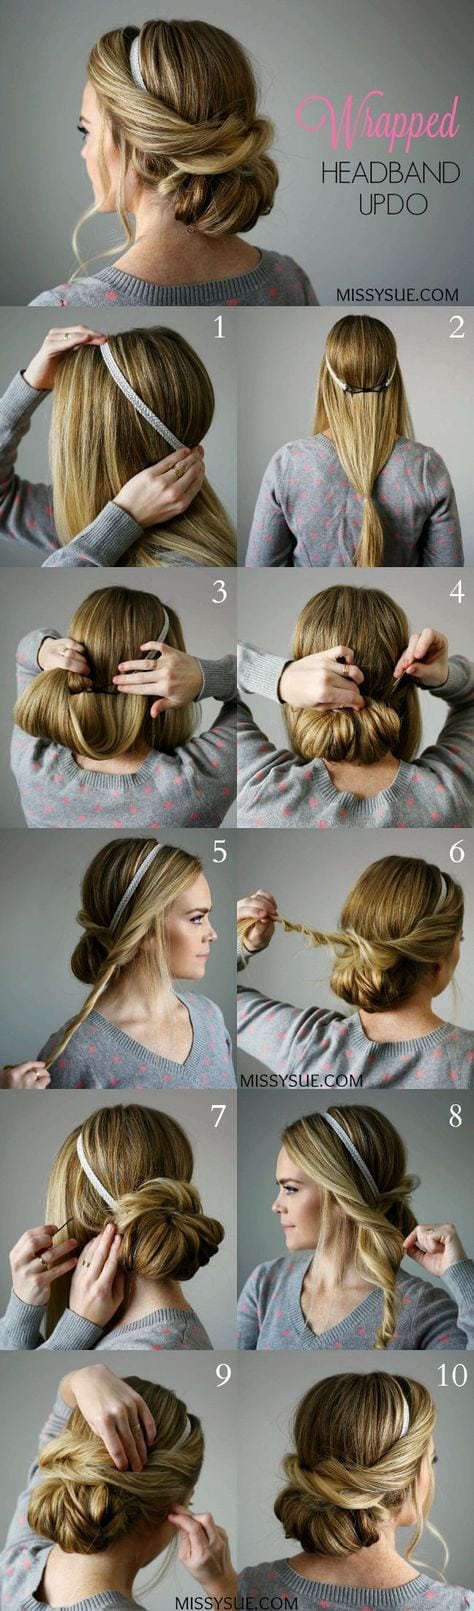 [ad_1]

25 Step By Step Tutorial For Beautiful Hair Updos ❤ – Page 2 of 5 – Trend To Wear
Source by powerupandserve
[ad_2]
			
			…